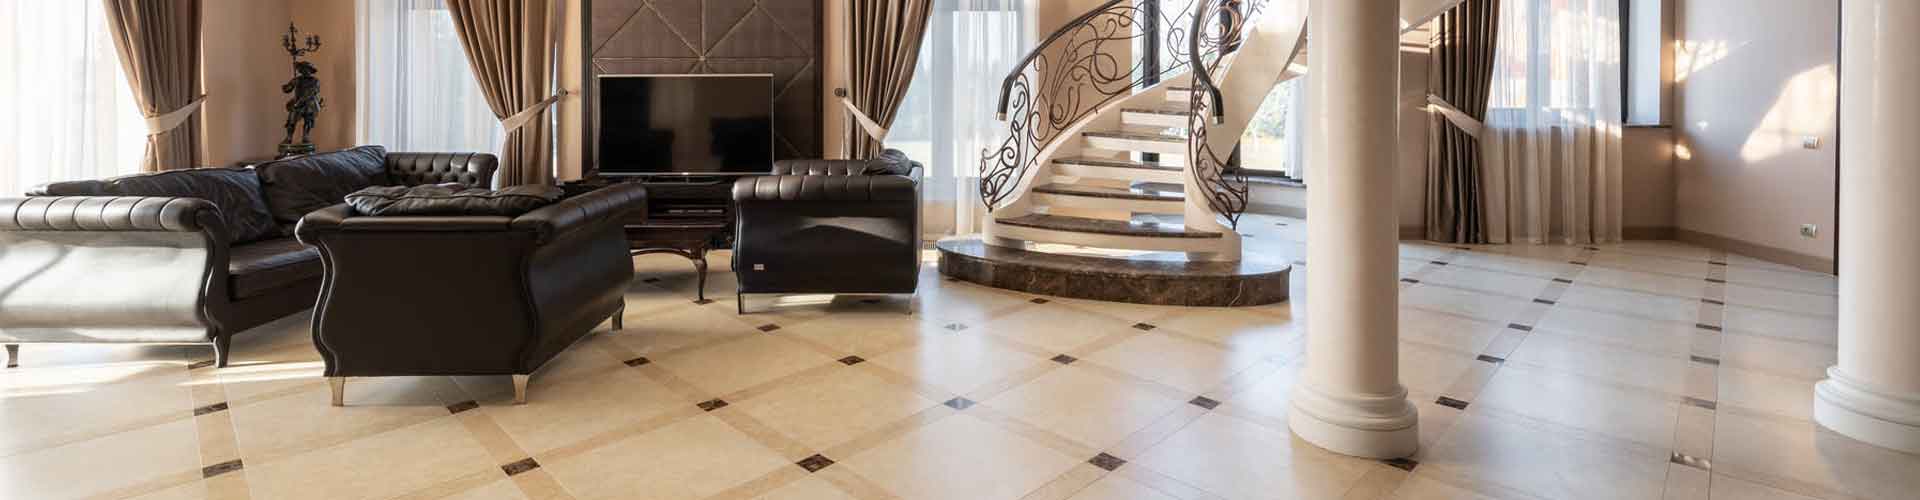 Comparison of Marble floor with other floors